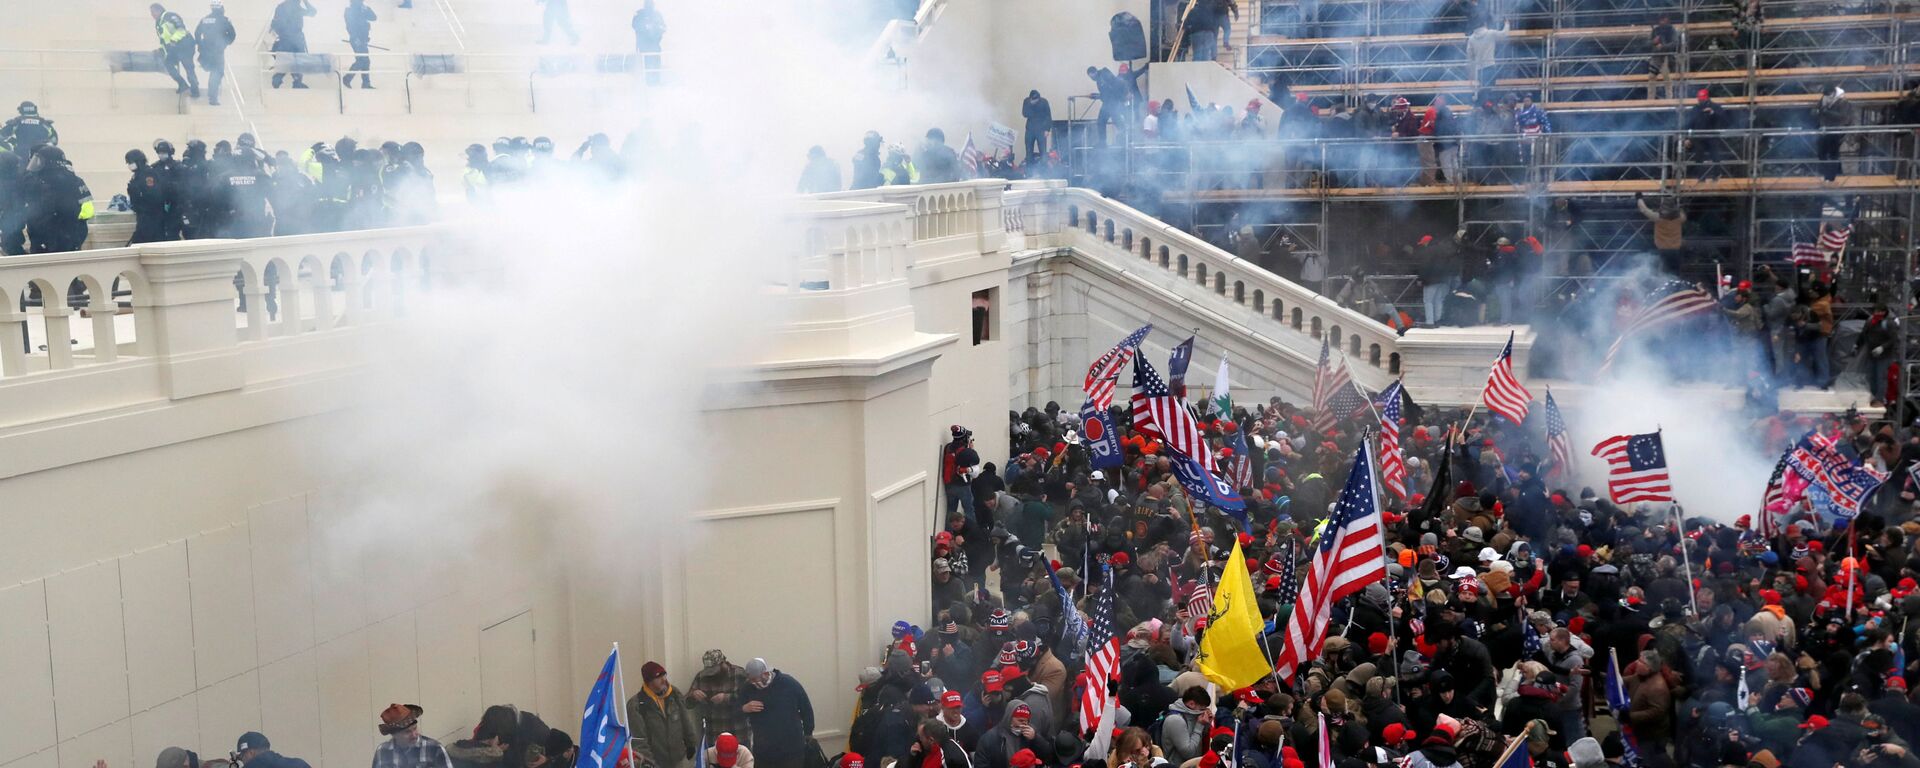 A mob of supporters of former U.S. President Donald Trump fight with members of law enforcement at a door they broke open as they storm the U.S. Capitol Building in Washington, U.S., January 6, 2021 - Sputnik International, 1920, 08.09.2021